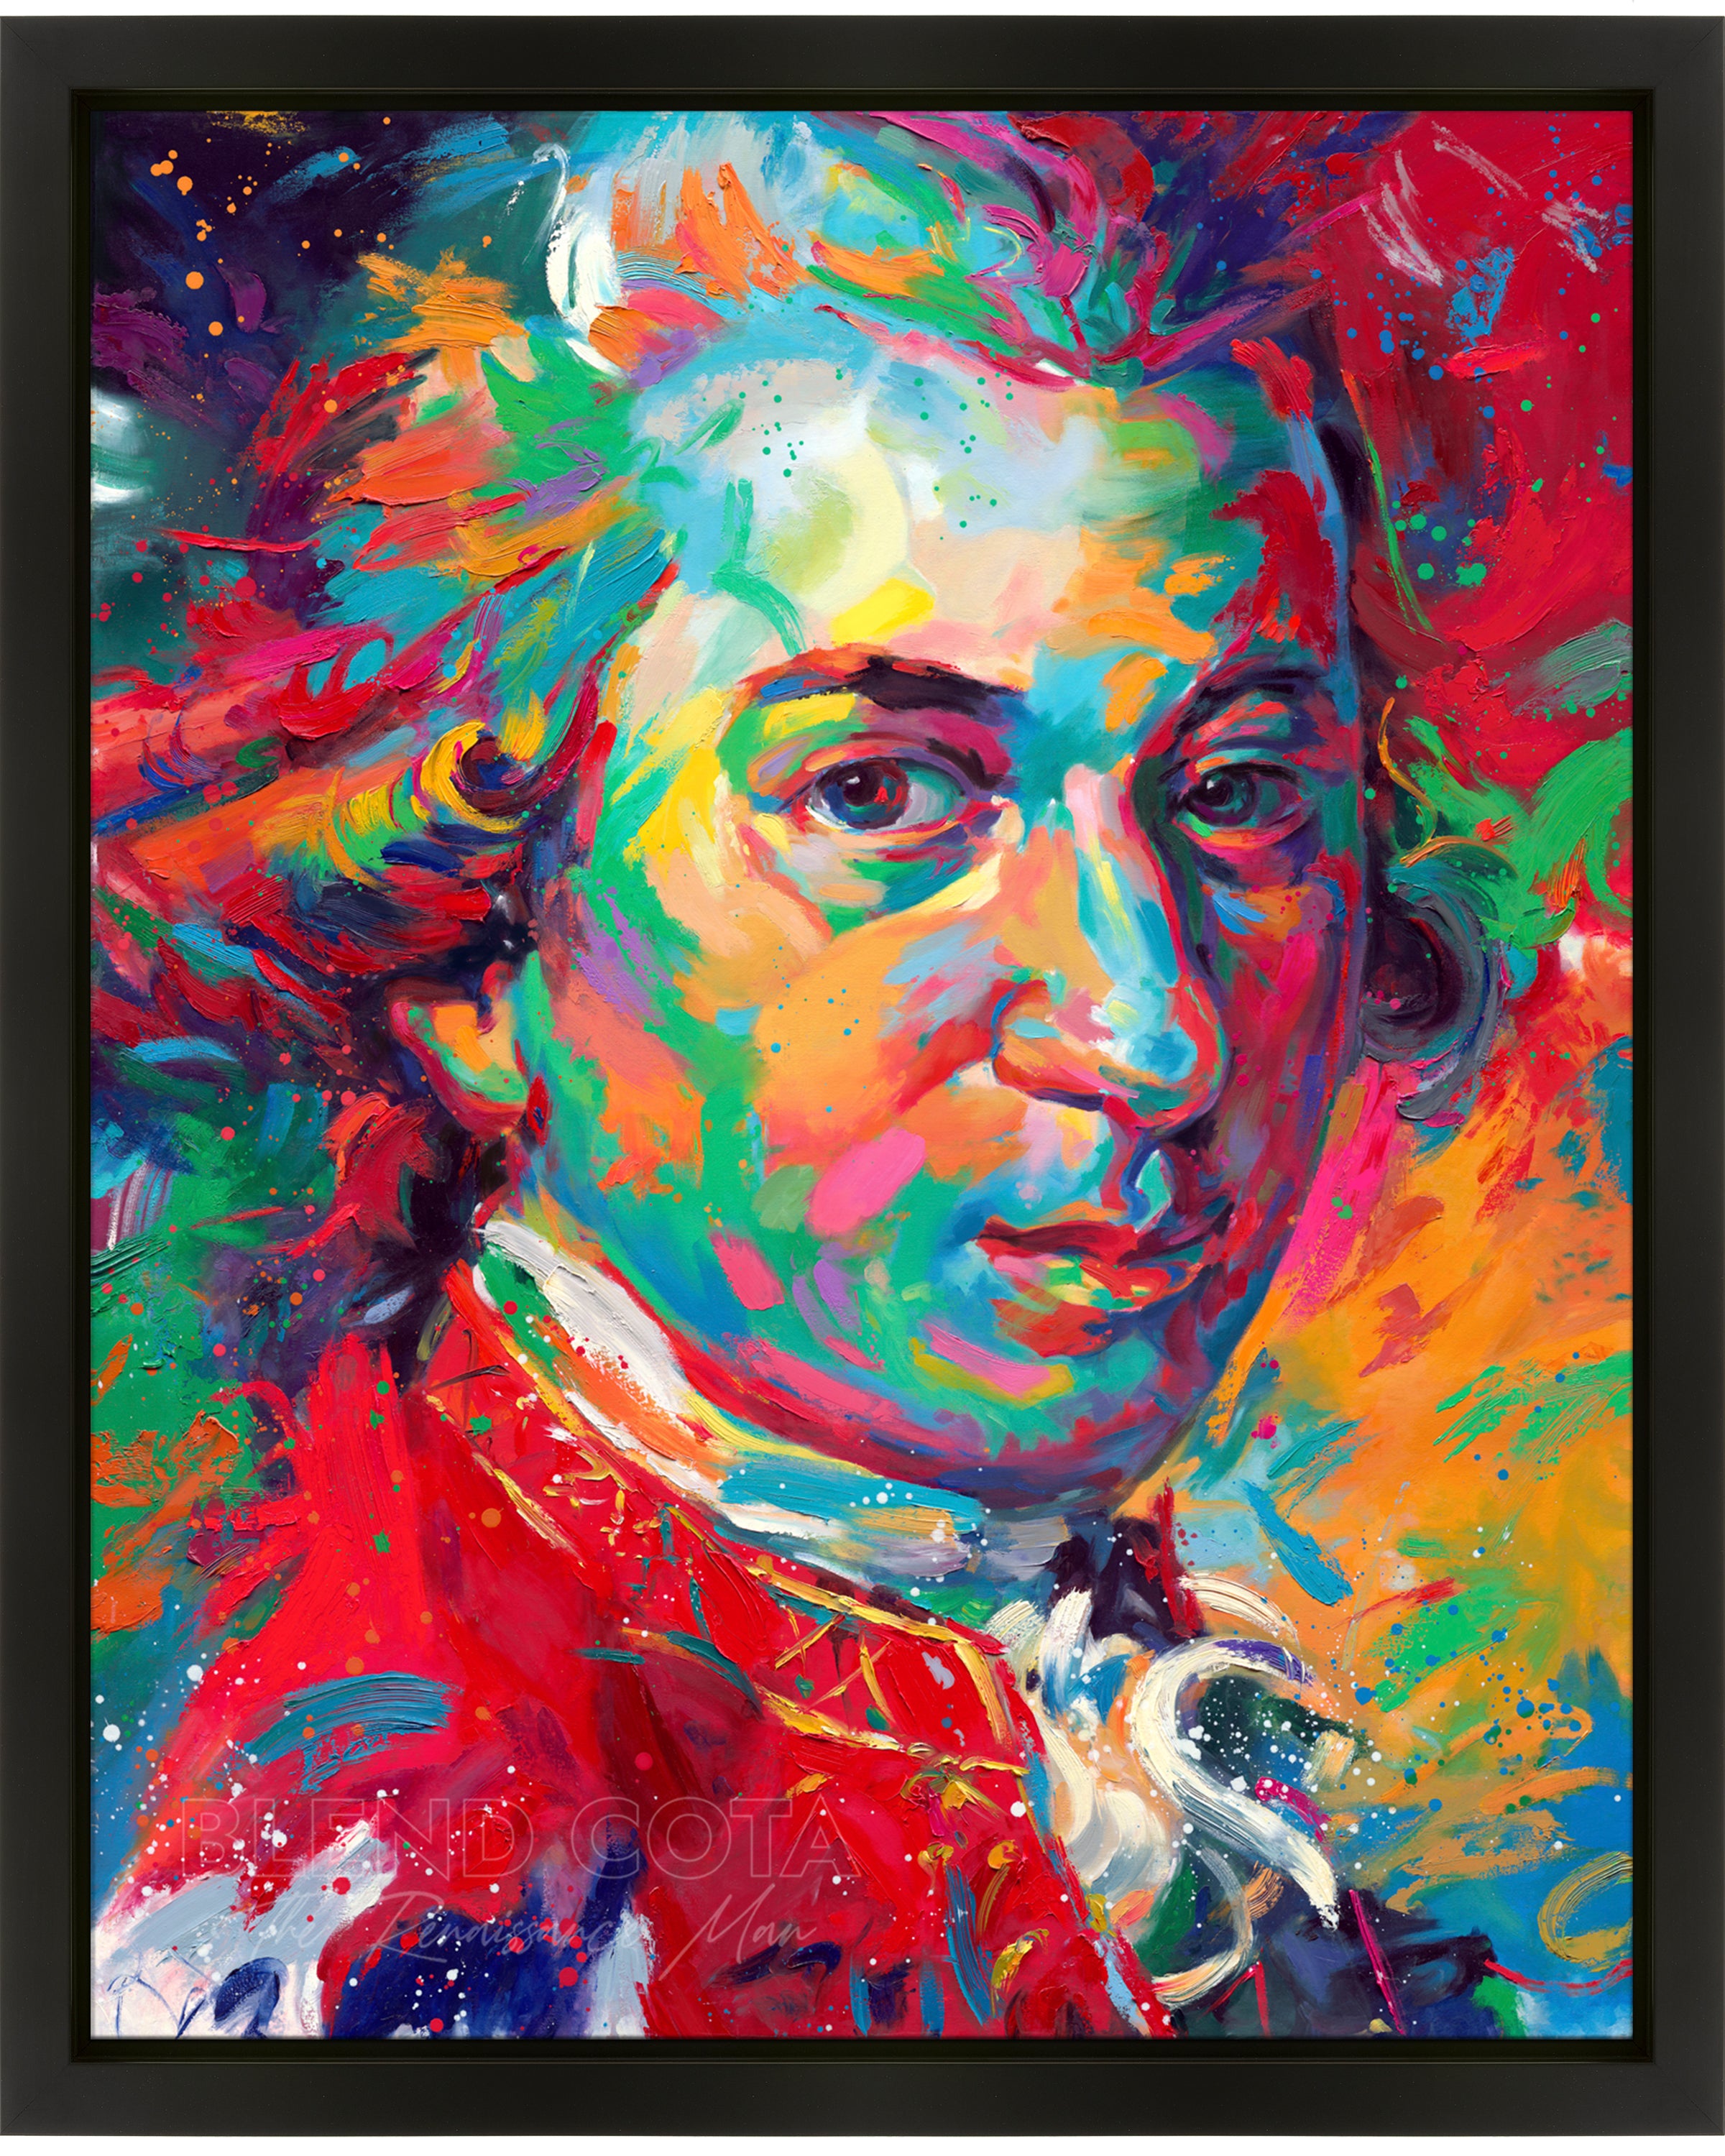 Mozart  Requiem Unfinished an Original Oil Painting from Blend Cota Studios in a black  Frame